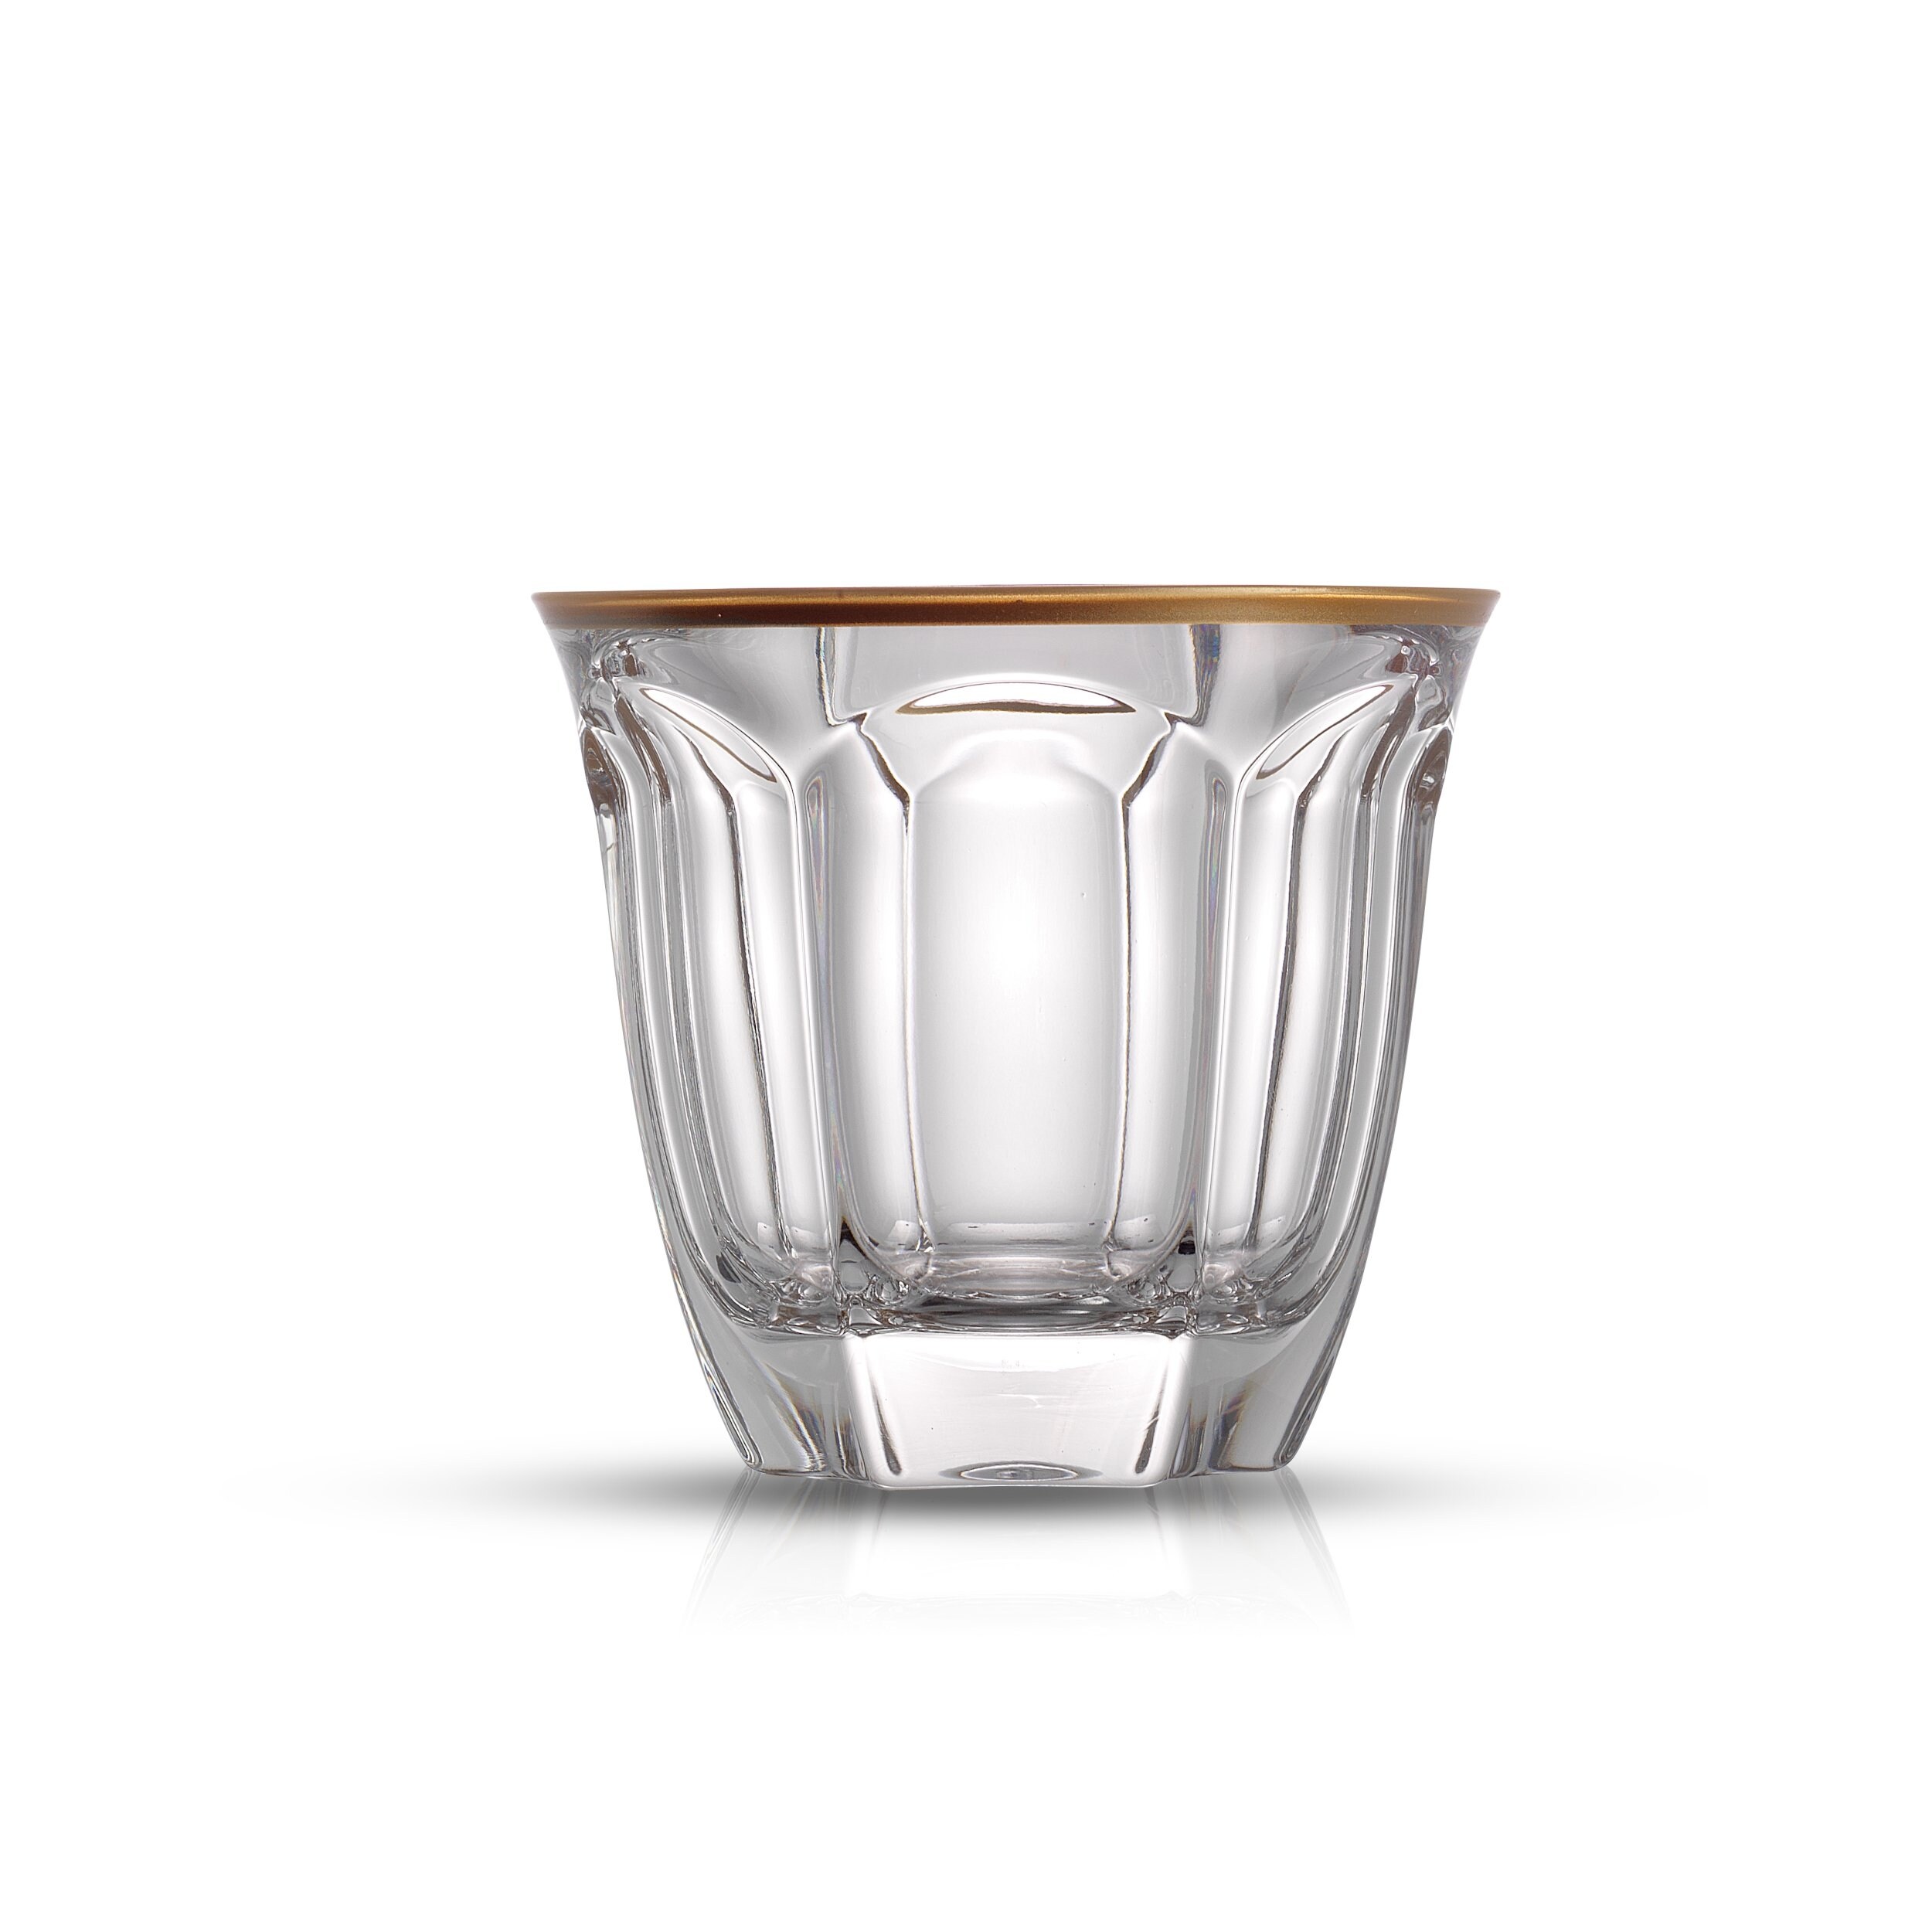 https://ak1.ostkcdn.com/images/products/is/images/direct/684883df45308c870e3165453bdbeae168107cba/JoyJolt-Windsor-Double-Old-Fashioned-Tumblers---7.4-oz--Set-of-2.jpg